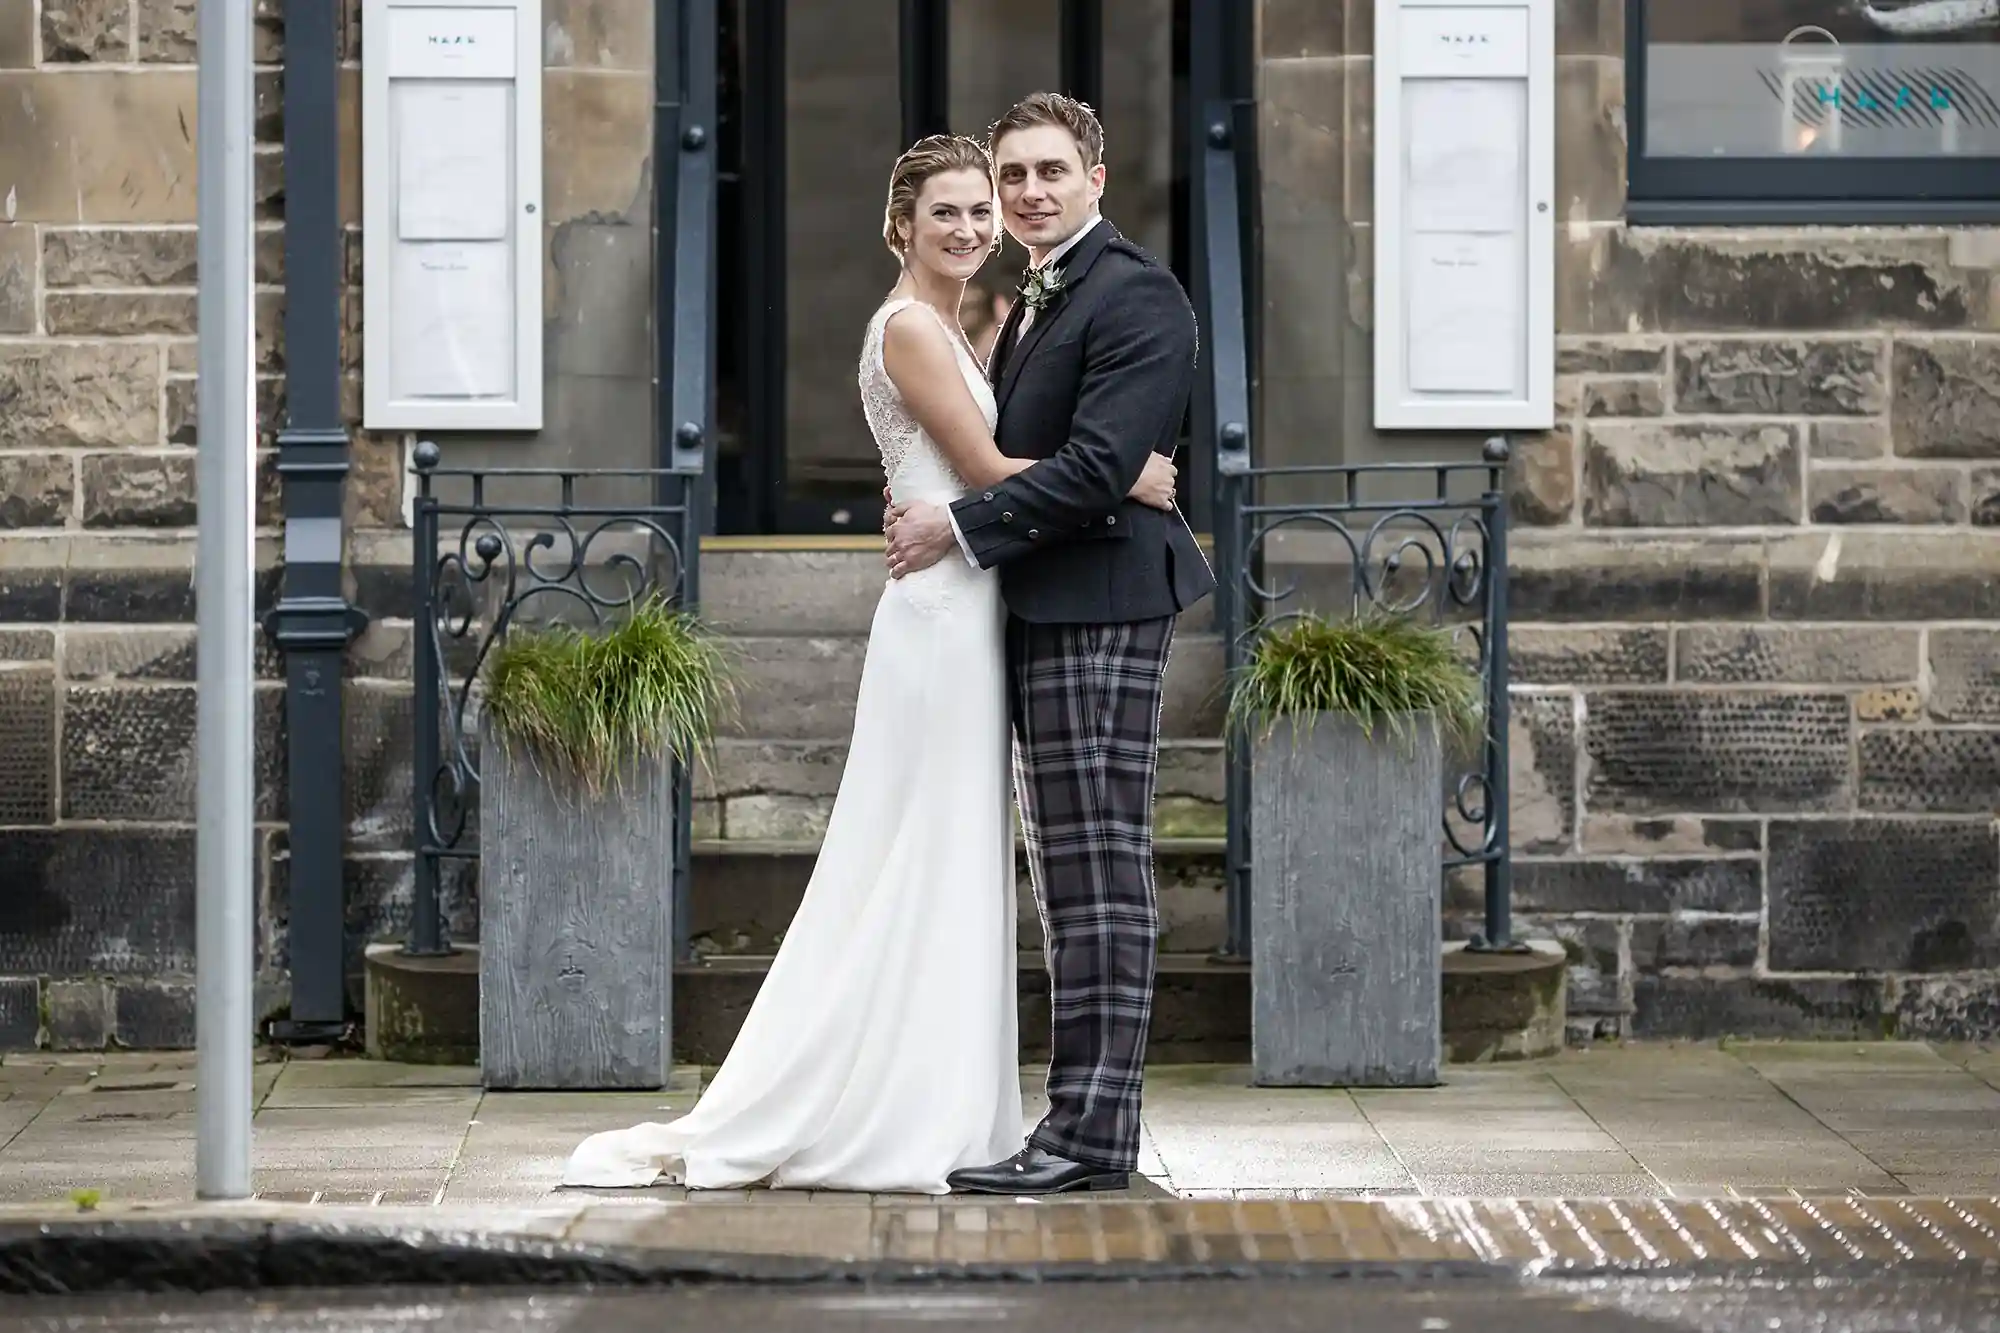 A bride in a white dress and a groom in a kilt embracing outside a building with classical architecture.